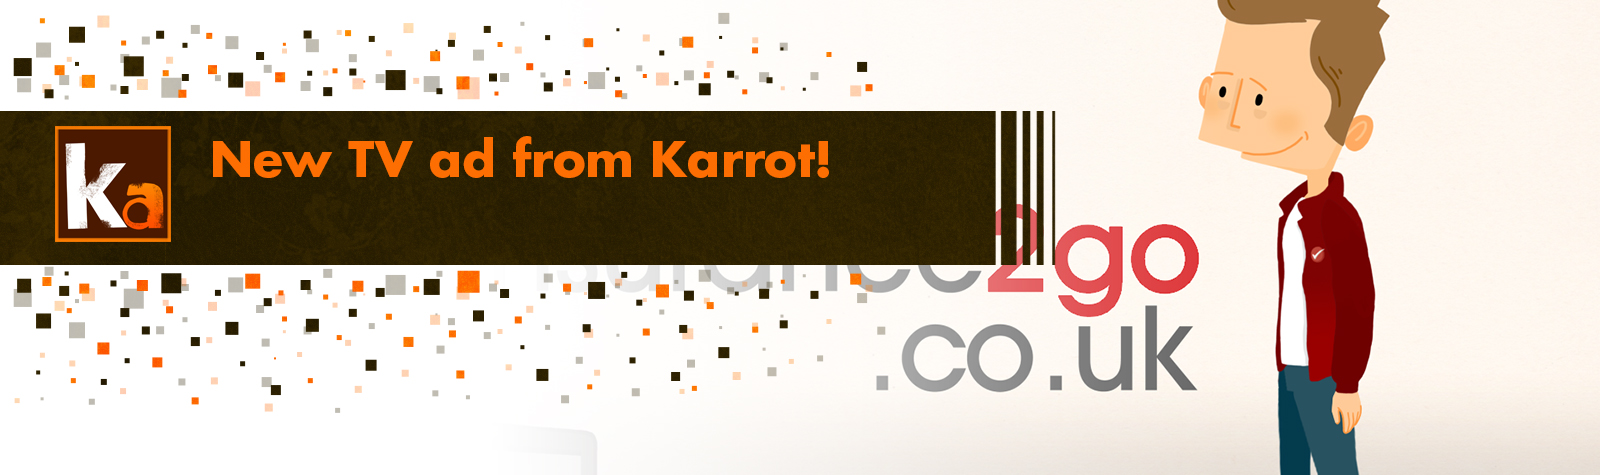 New TV ad from Karrot!